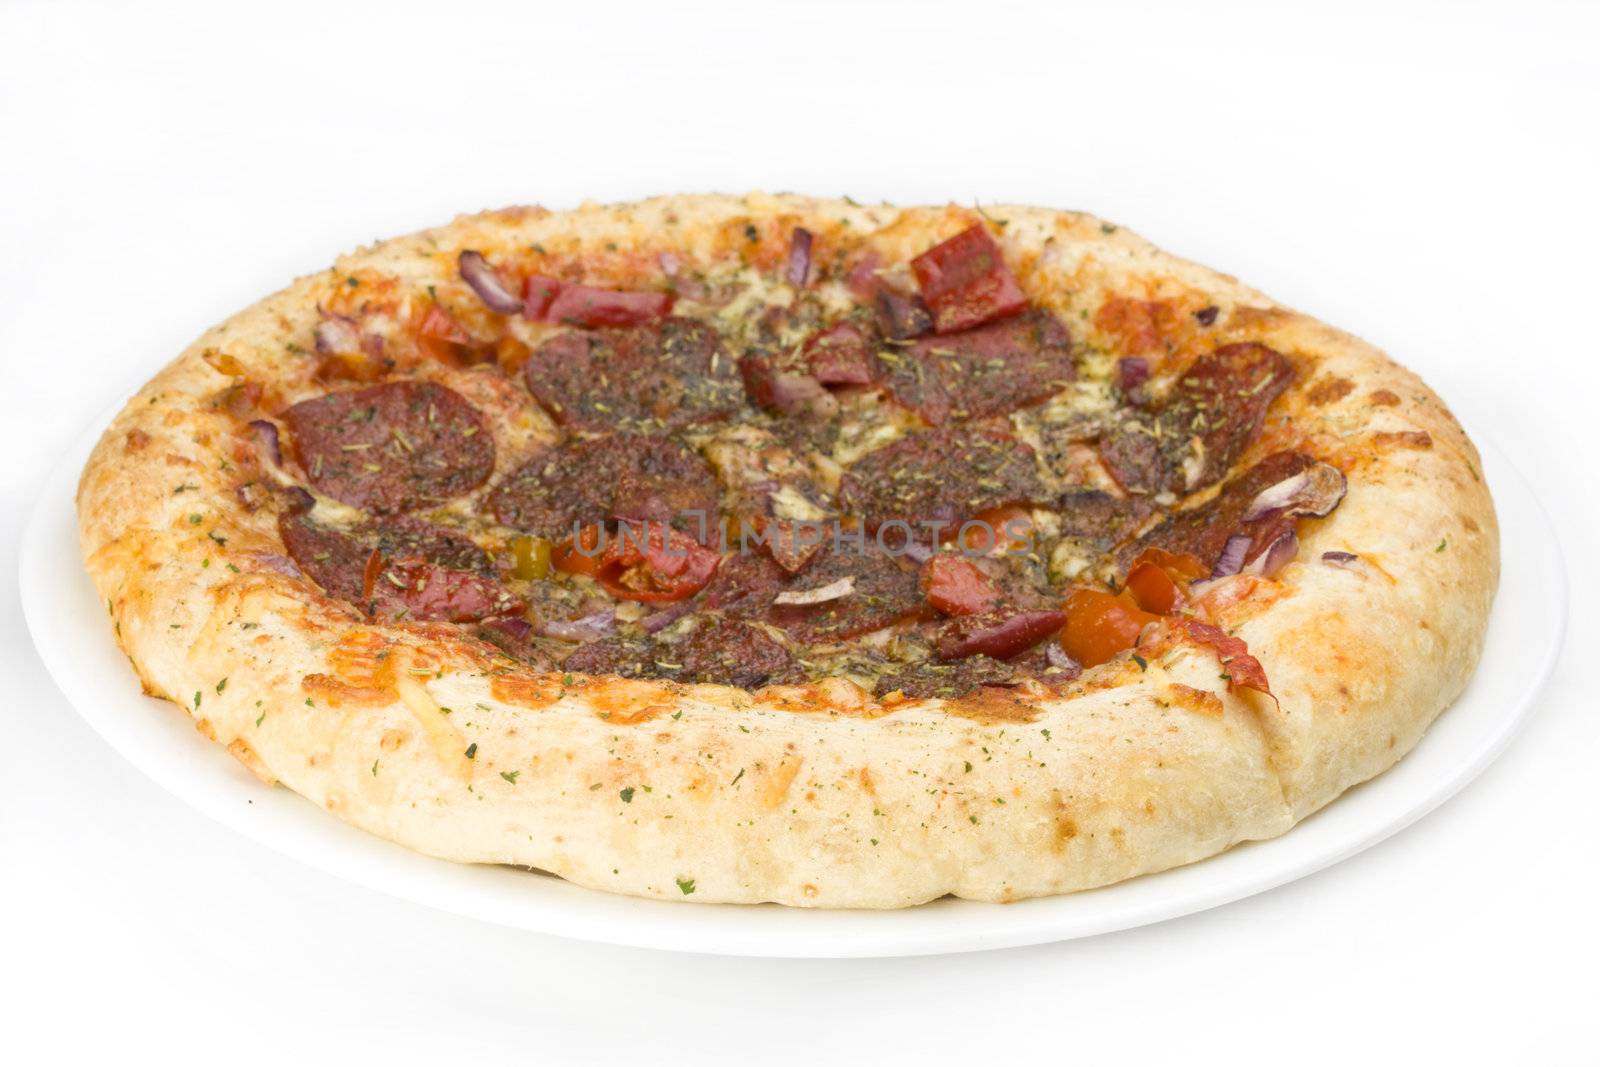 pizza on a plate on white background